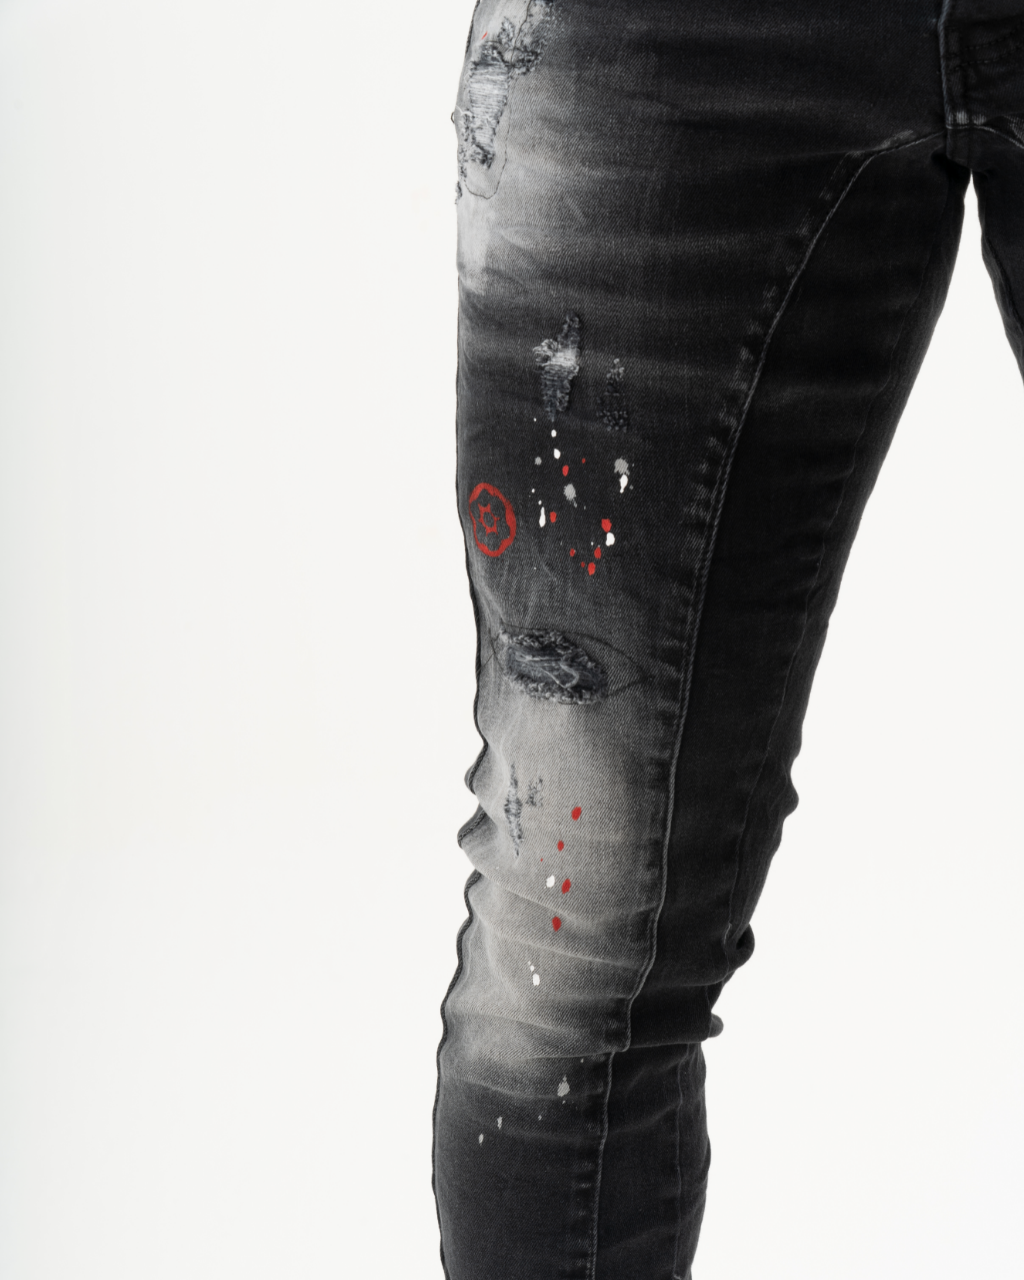 A man is wearing a pair of THUNDERBIRD skinny fit jeans with added stretch, featuring red paint stains.